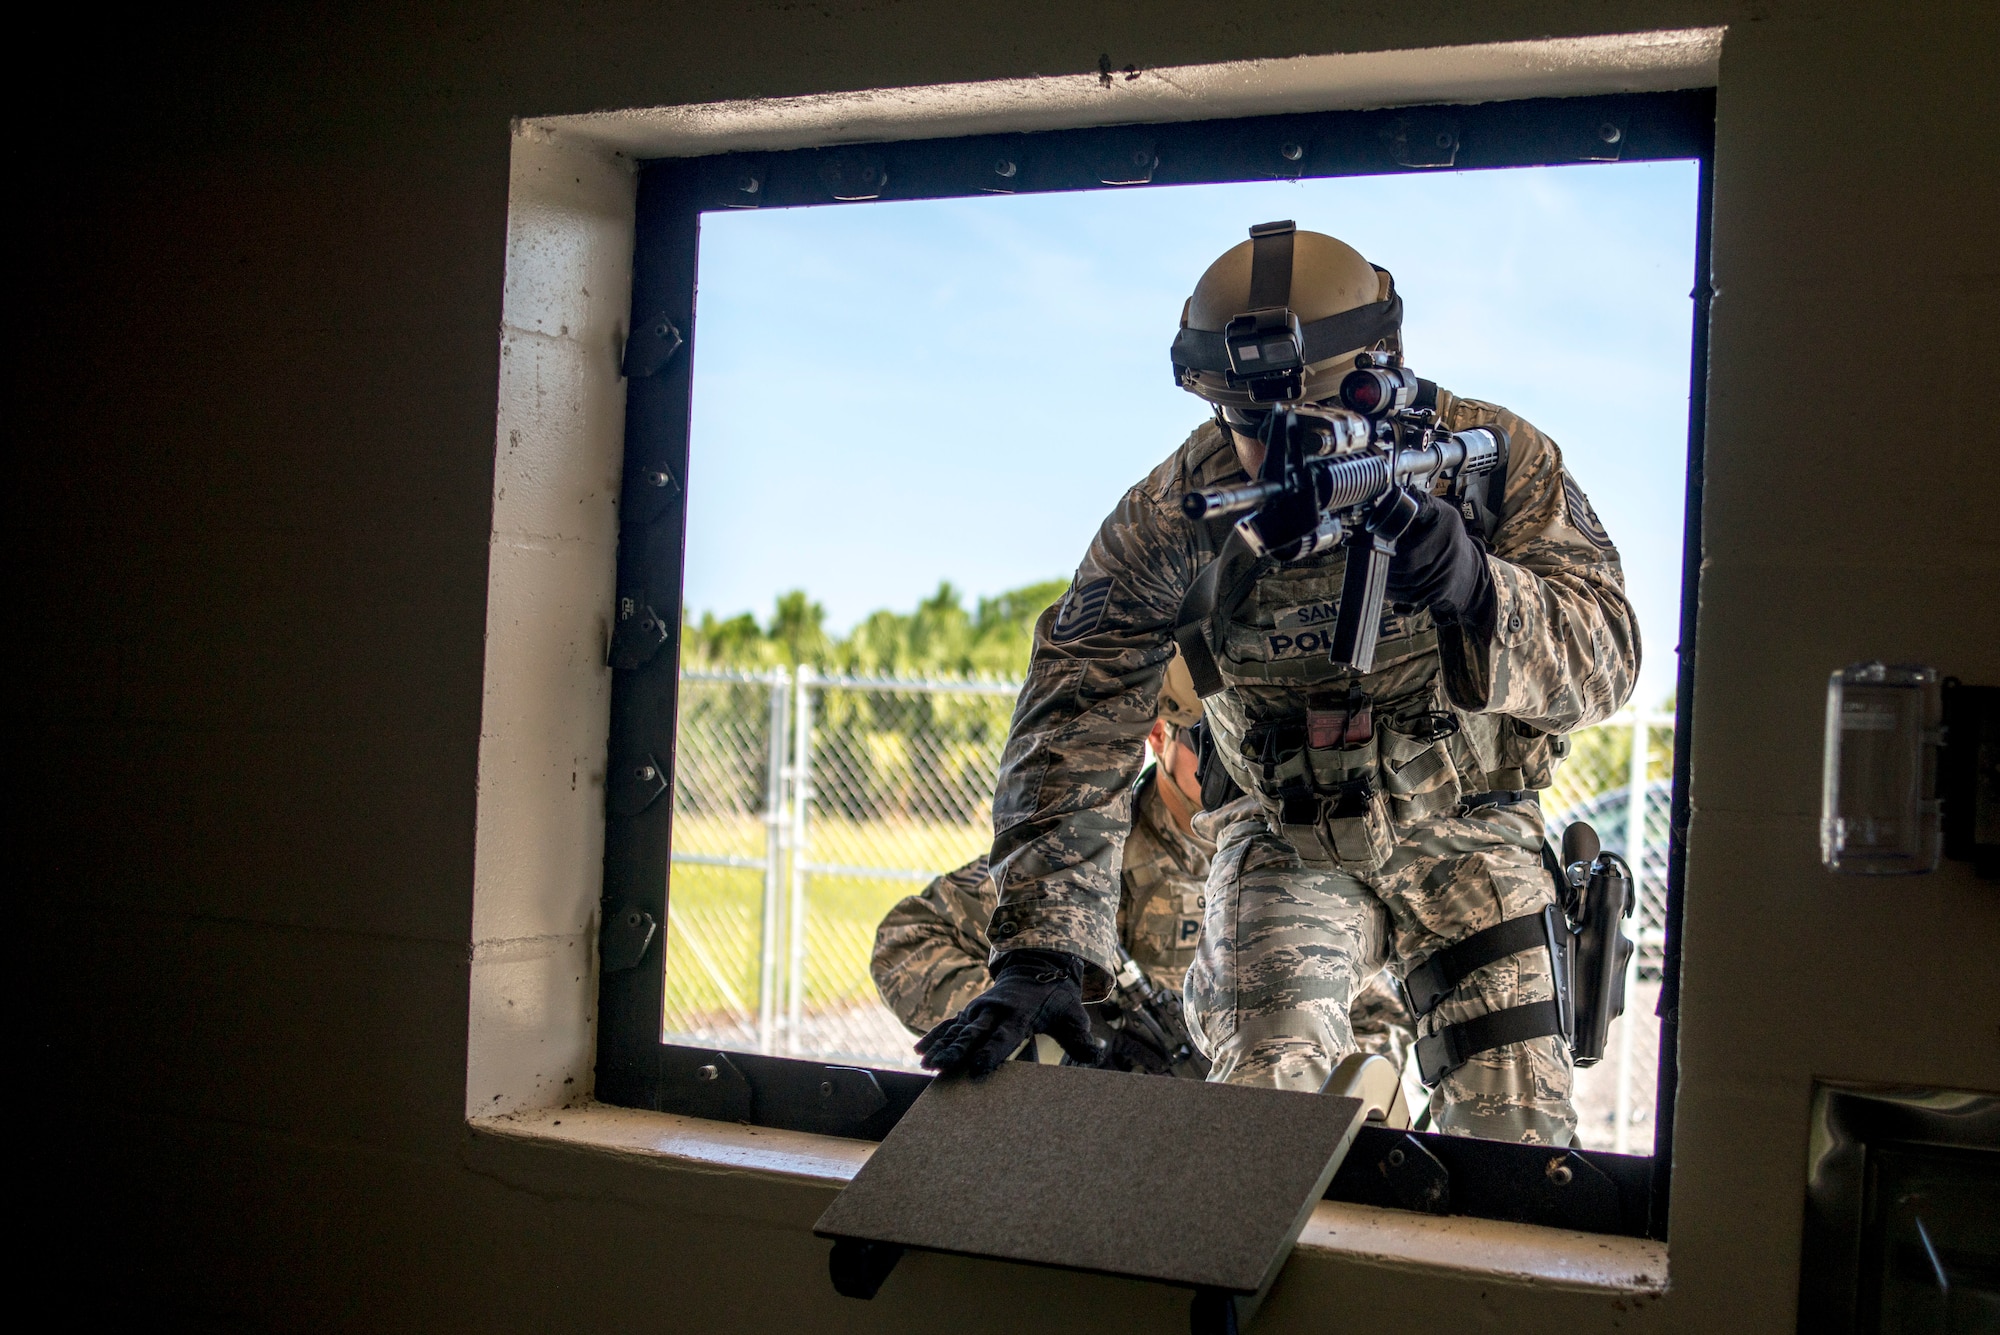 U.S. Air Force Tech. Sgt. Melvin Santos, an emergency services team leader assigned to the 6th Security Forces Squadron, climbs through a window of the simulator house at MacDill Air Force Base, Fla., Aug. 23, 2018.